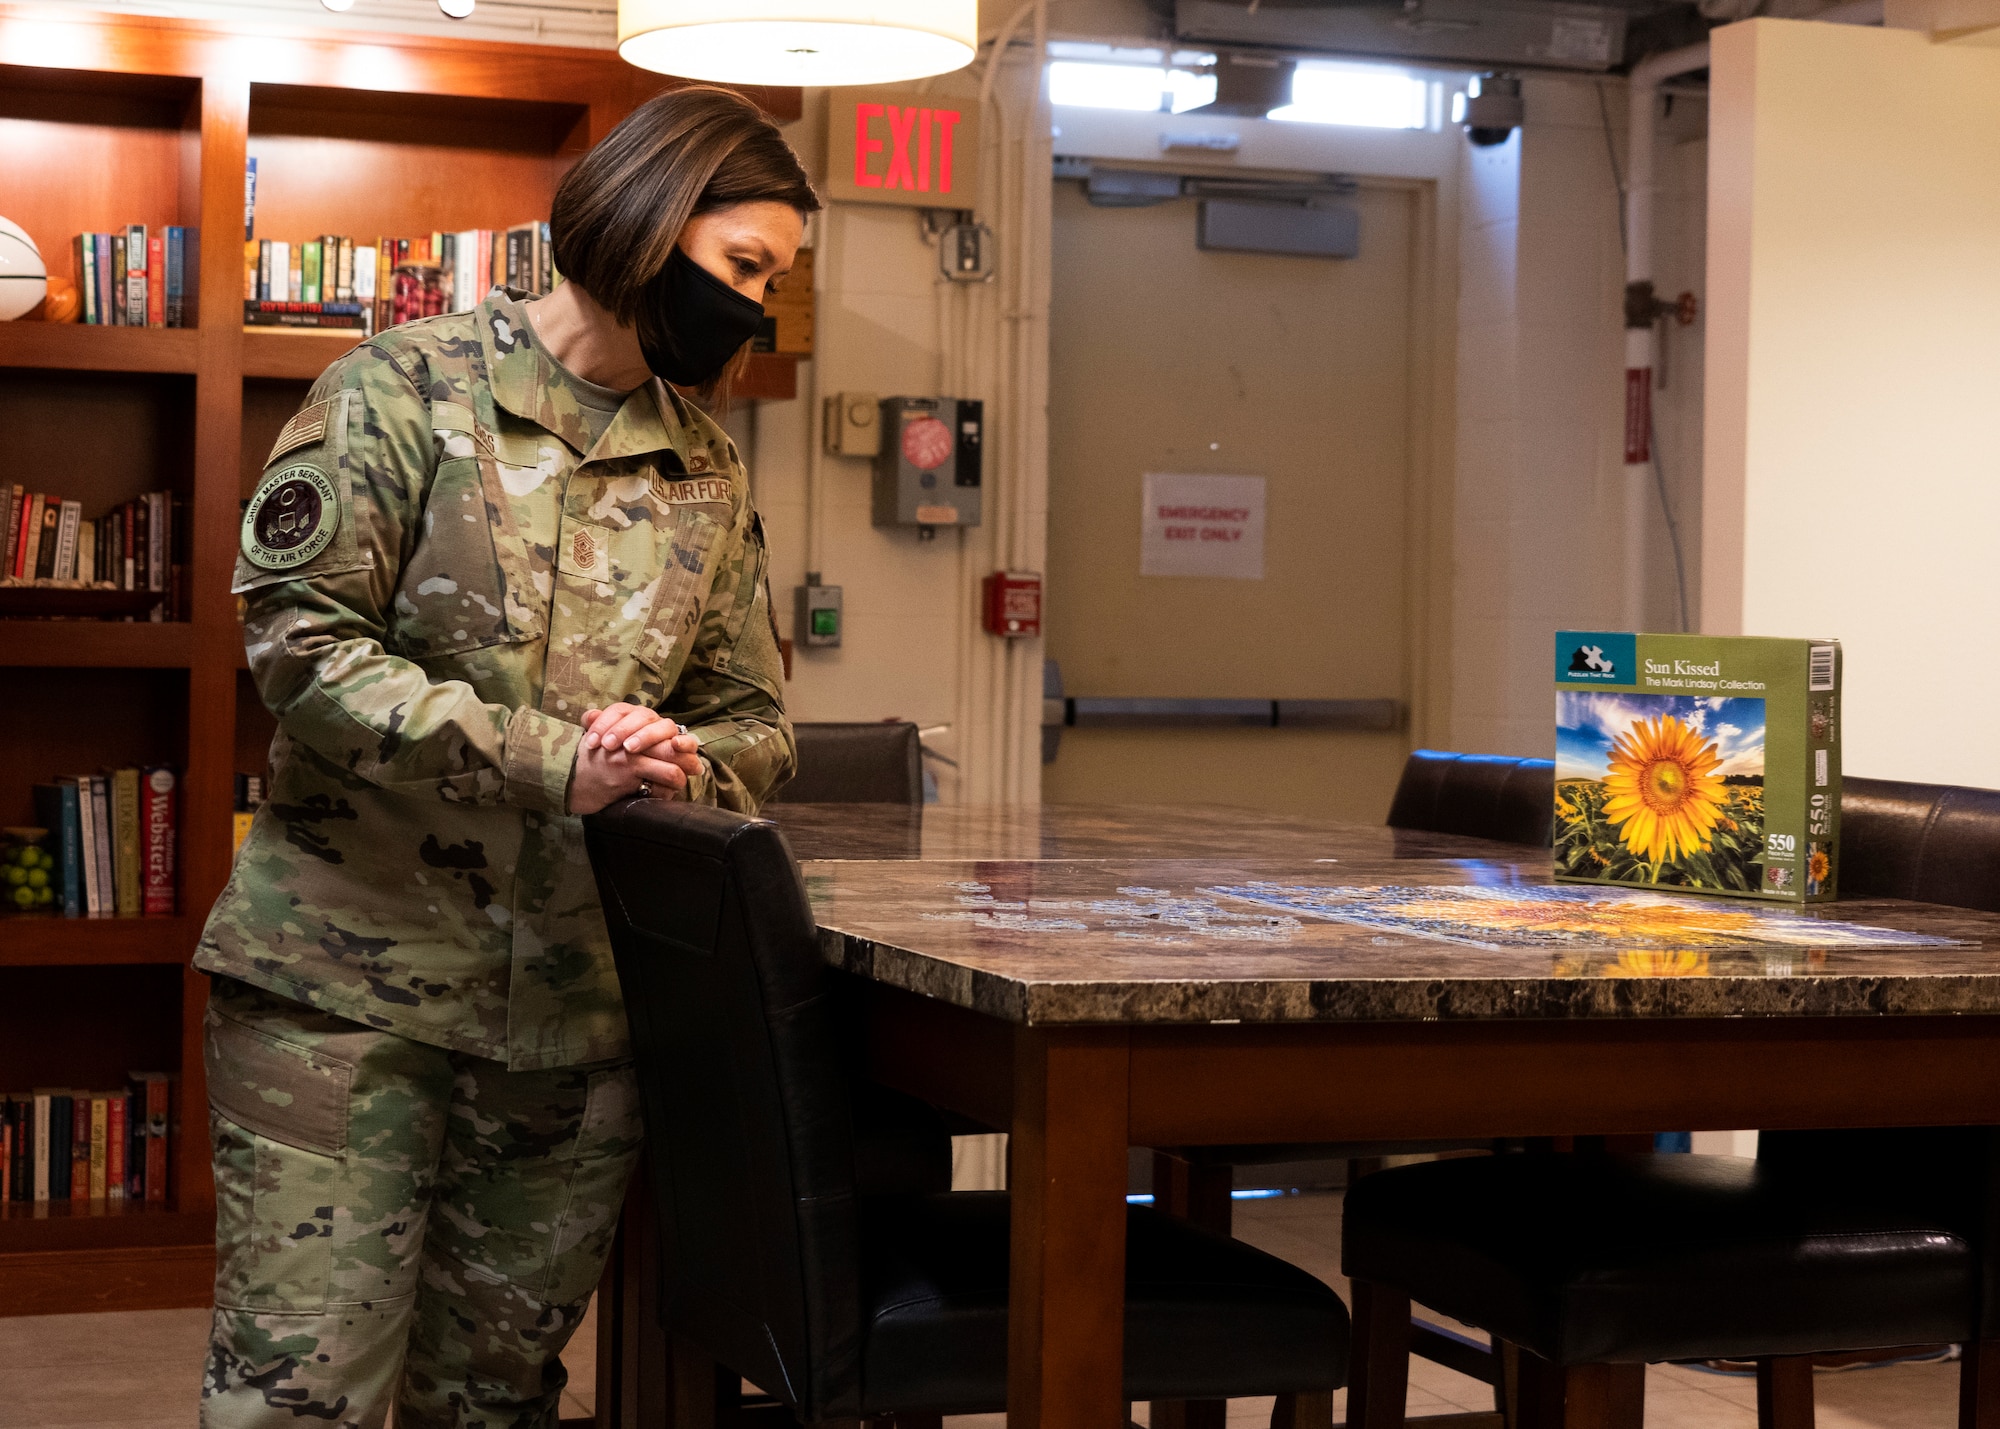 Chief Master Sgt. of the Air Force JoAnne S. Bass looks over an unfinished puzzle, Jan. 7, 2021, at Dover Air Force Base, Delaware. During her visit, Bass learned how AFMAO integrates resiliency into its day-to-day operations, in hopes of forming strong interpersonal bonds that can make a difference in Airmen’s lives. (U.S. Air Force photo by Staff Sgt. Benjamin N. Valmoja)